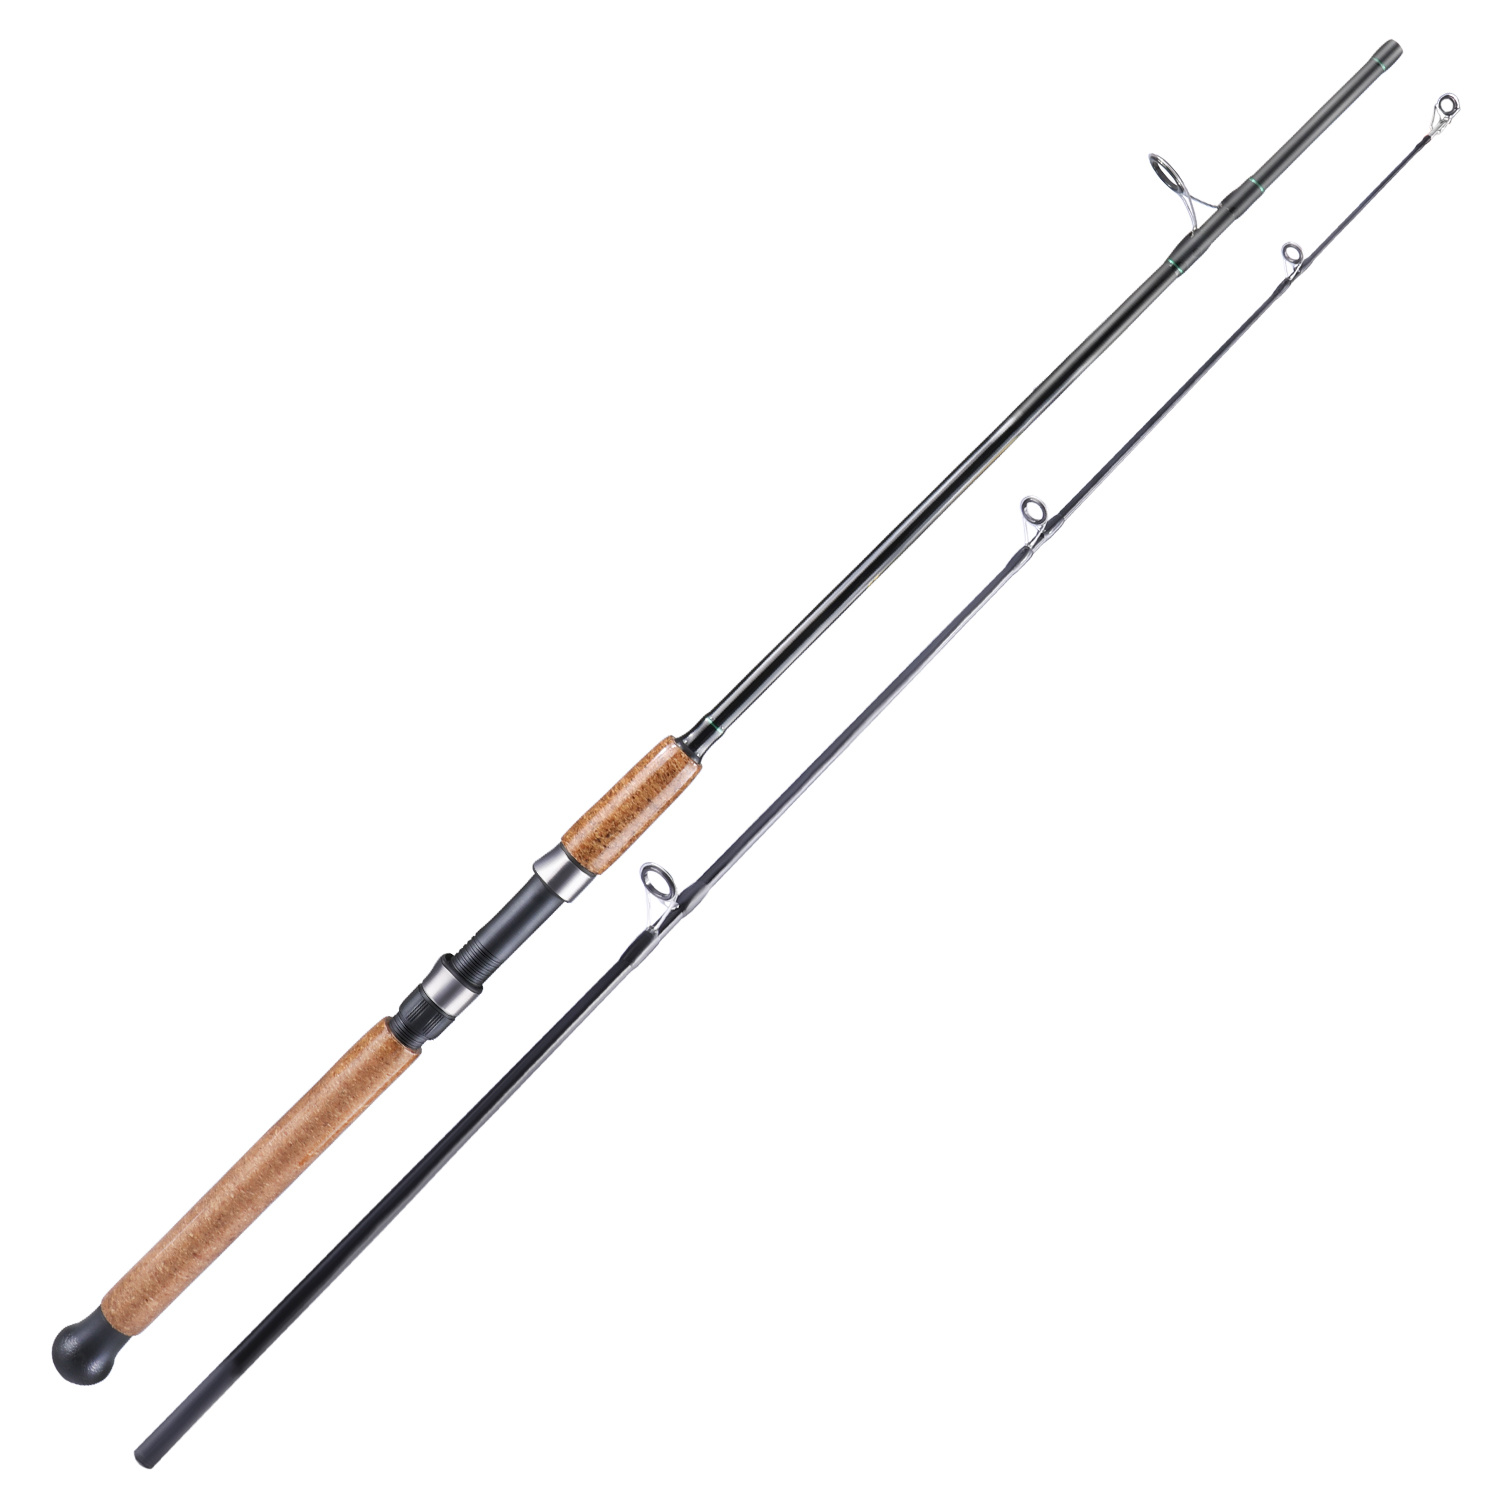 Sougayilang Fishing Rod, 180cm/5.91ft Strong & Durable Composite Graphite  And Glass Fiber Blanks, Fishing Pole With Cork Handle, MH Power Spinning Rod